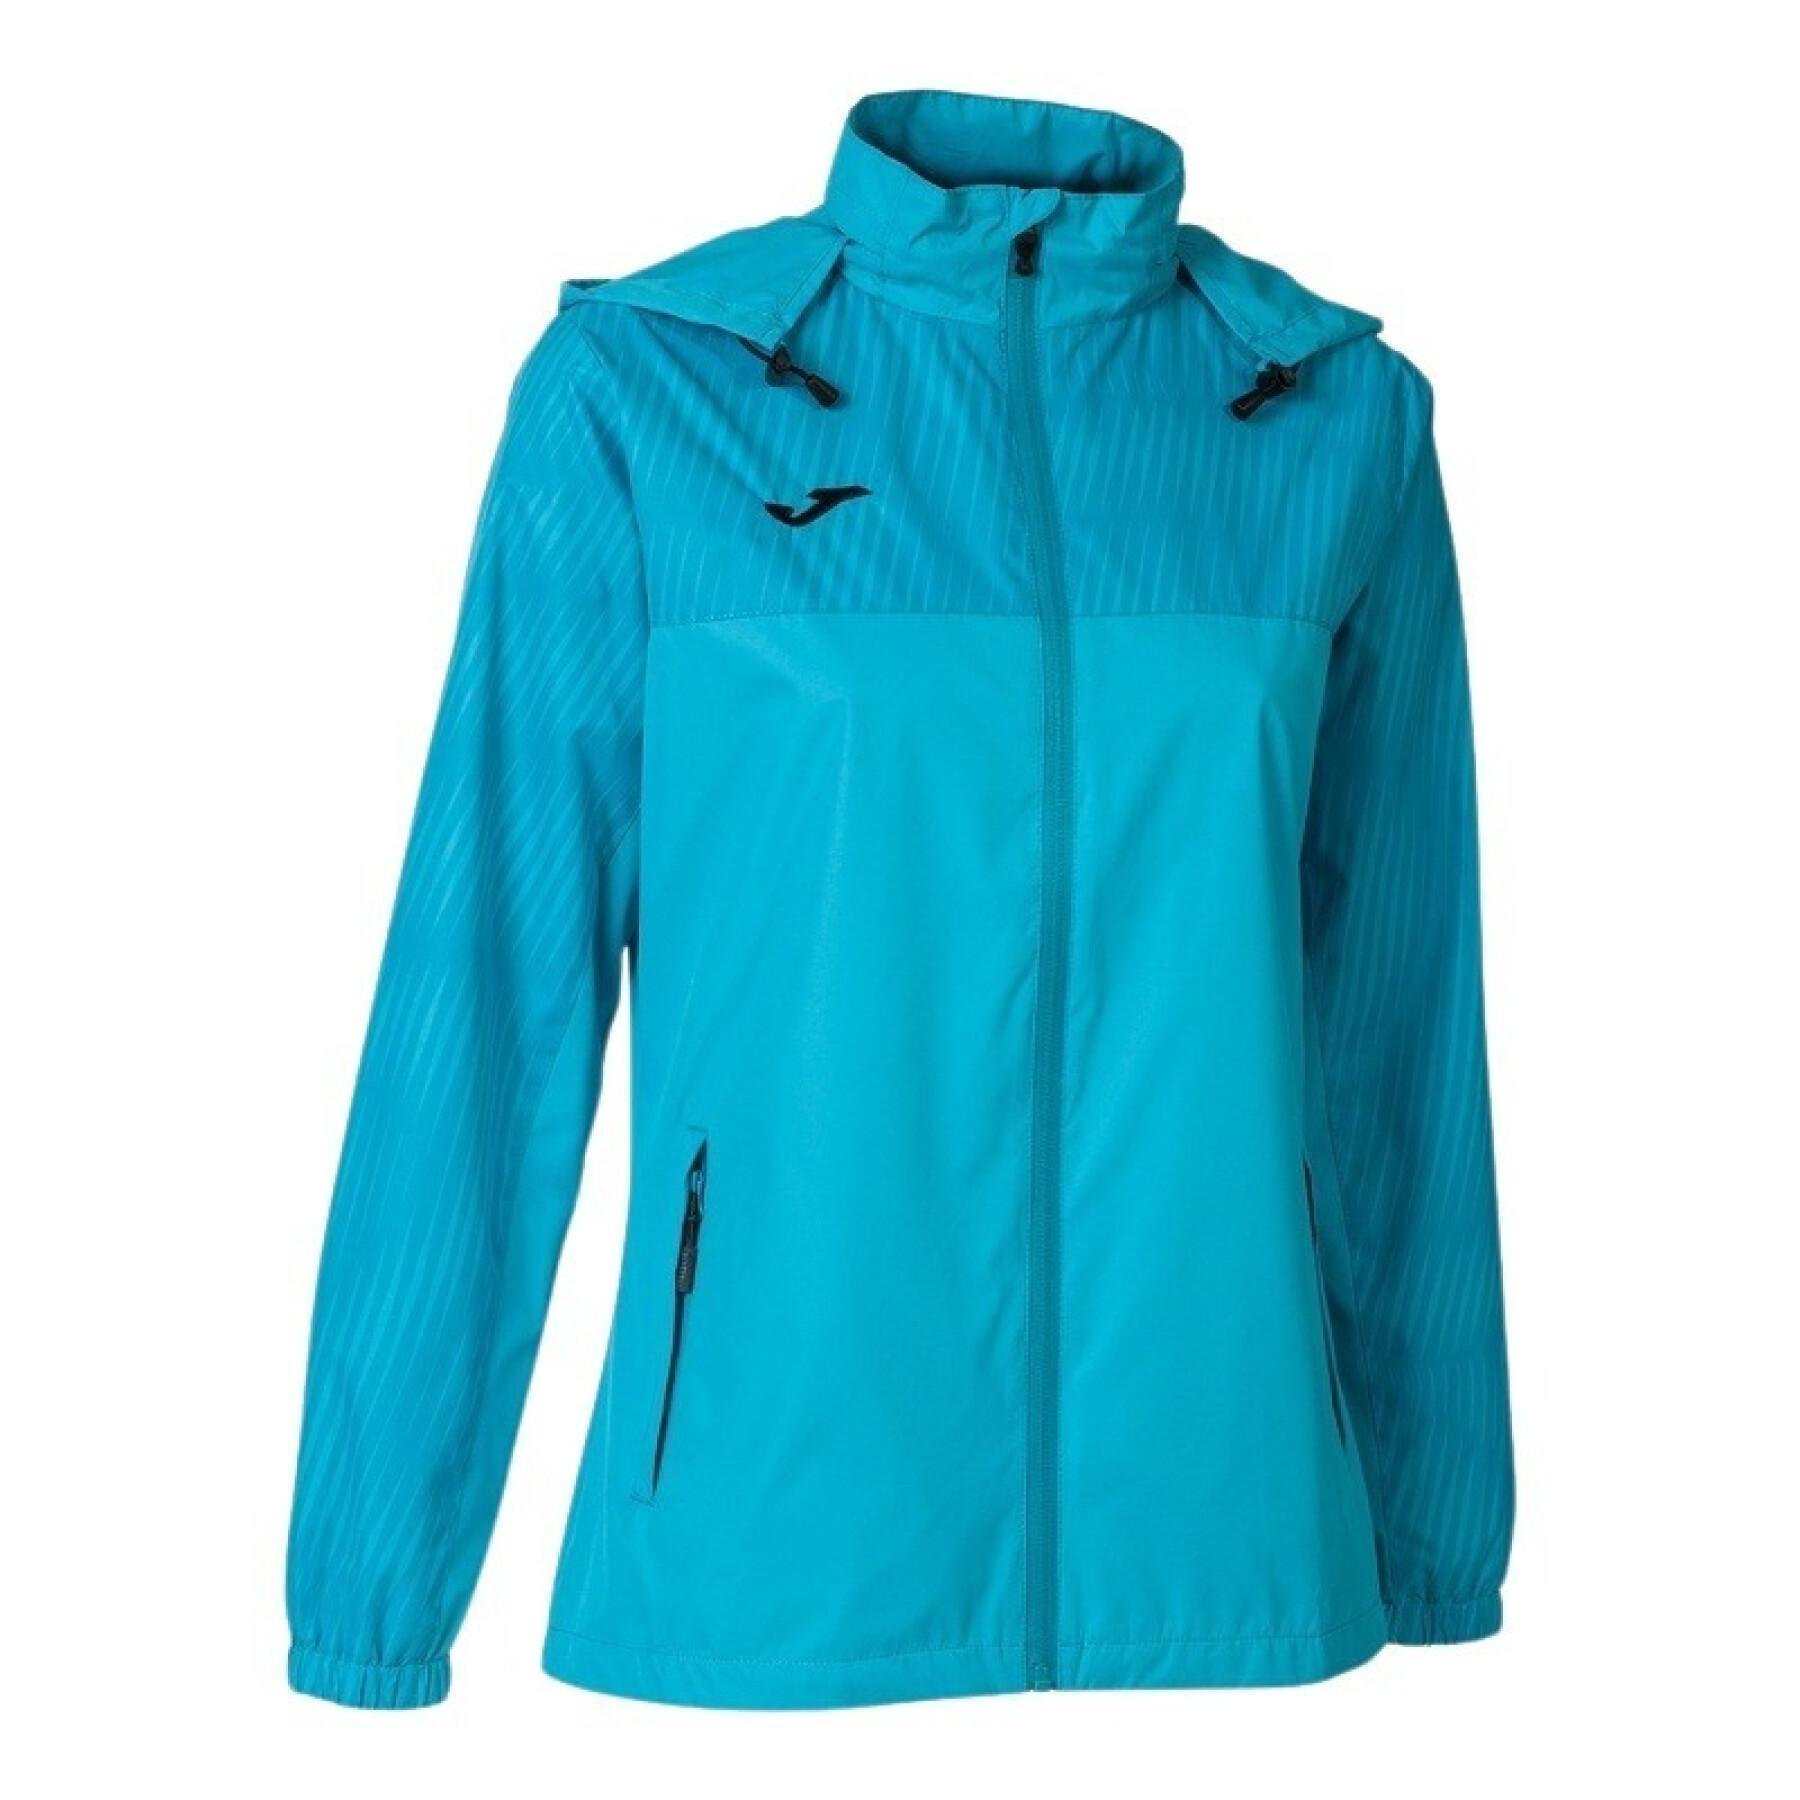 Chaqueta impermeable mujer Joma Montreal - Marcas - Ropa